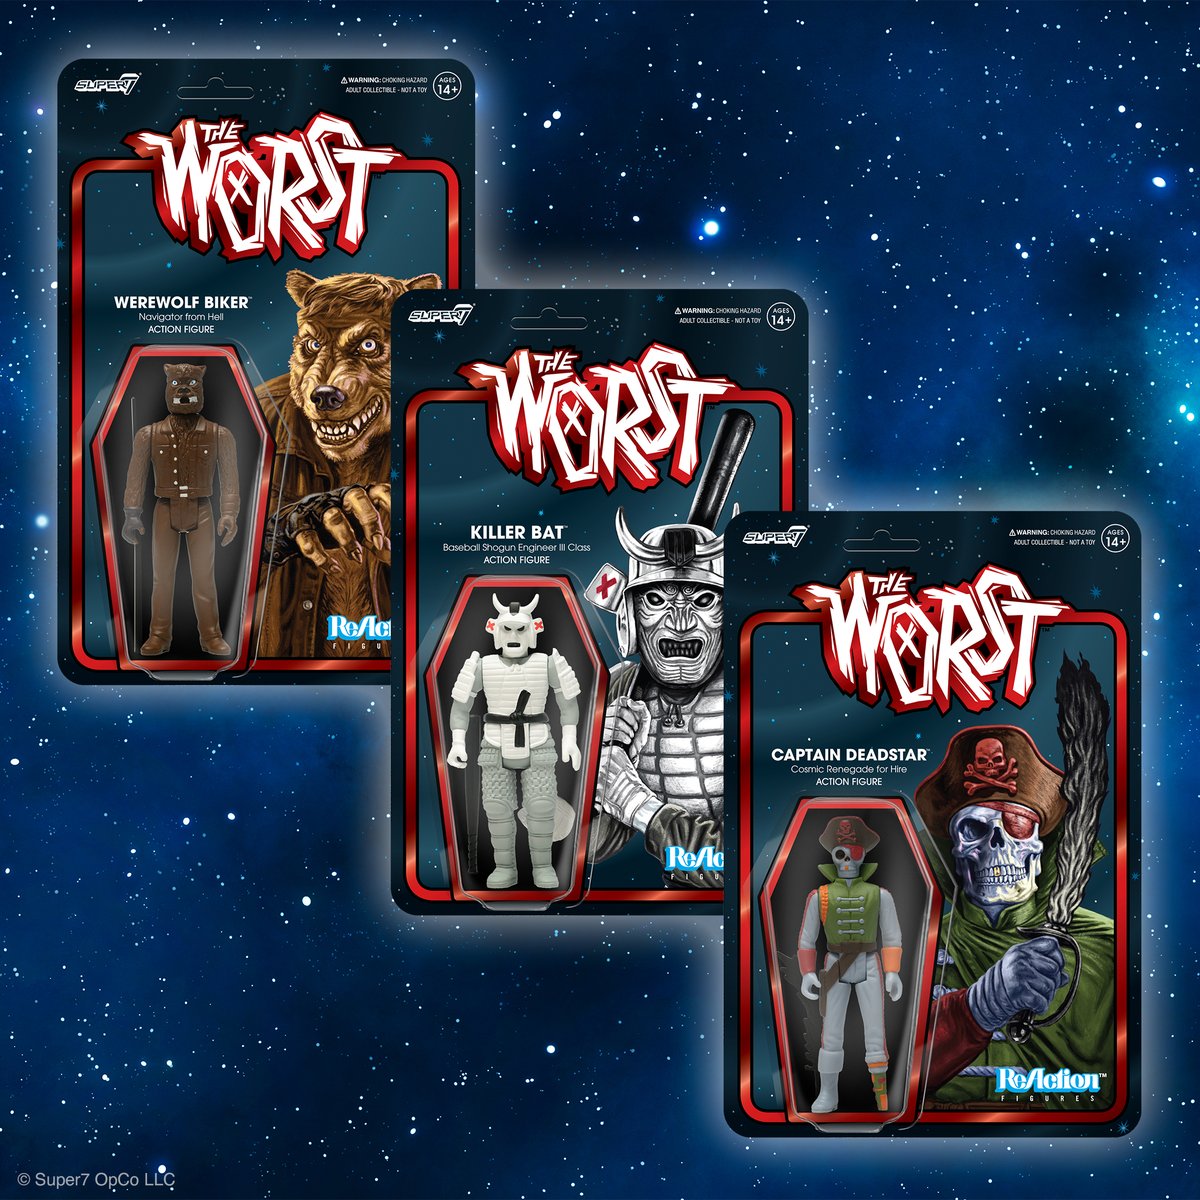 The most terrible villains aren’t always the ones with the big plans for global destruction or galactic rule. No, it’s the ones that thrive on randomly sowing murder, mayhem, and chaos that are The Worst! Available now at Super7.com! bit.ly/3QN7E14 #Super7